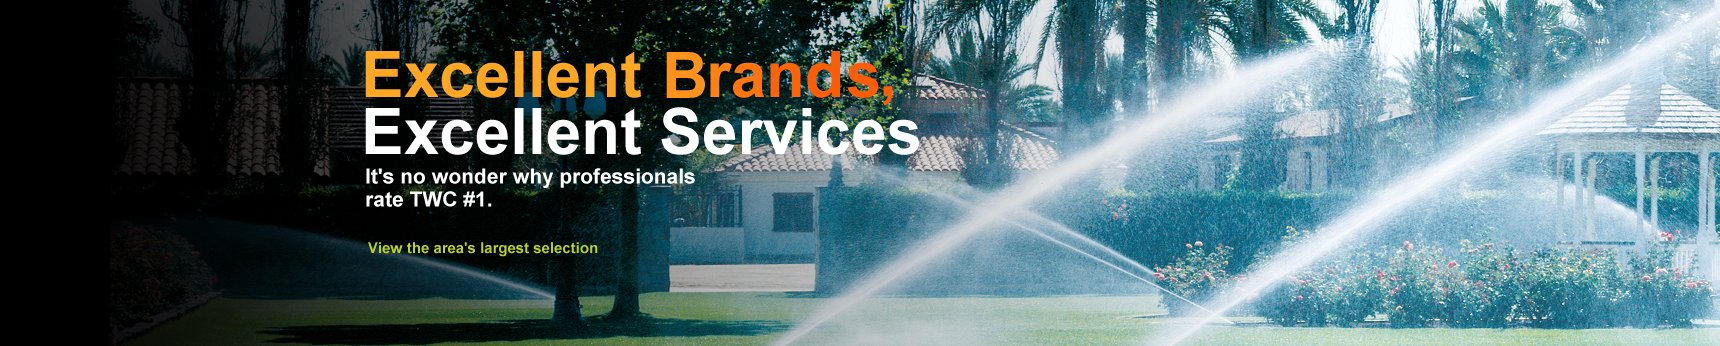 The Best Brands, The Best Services